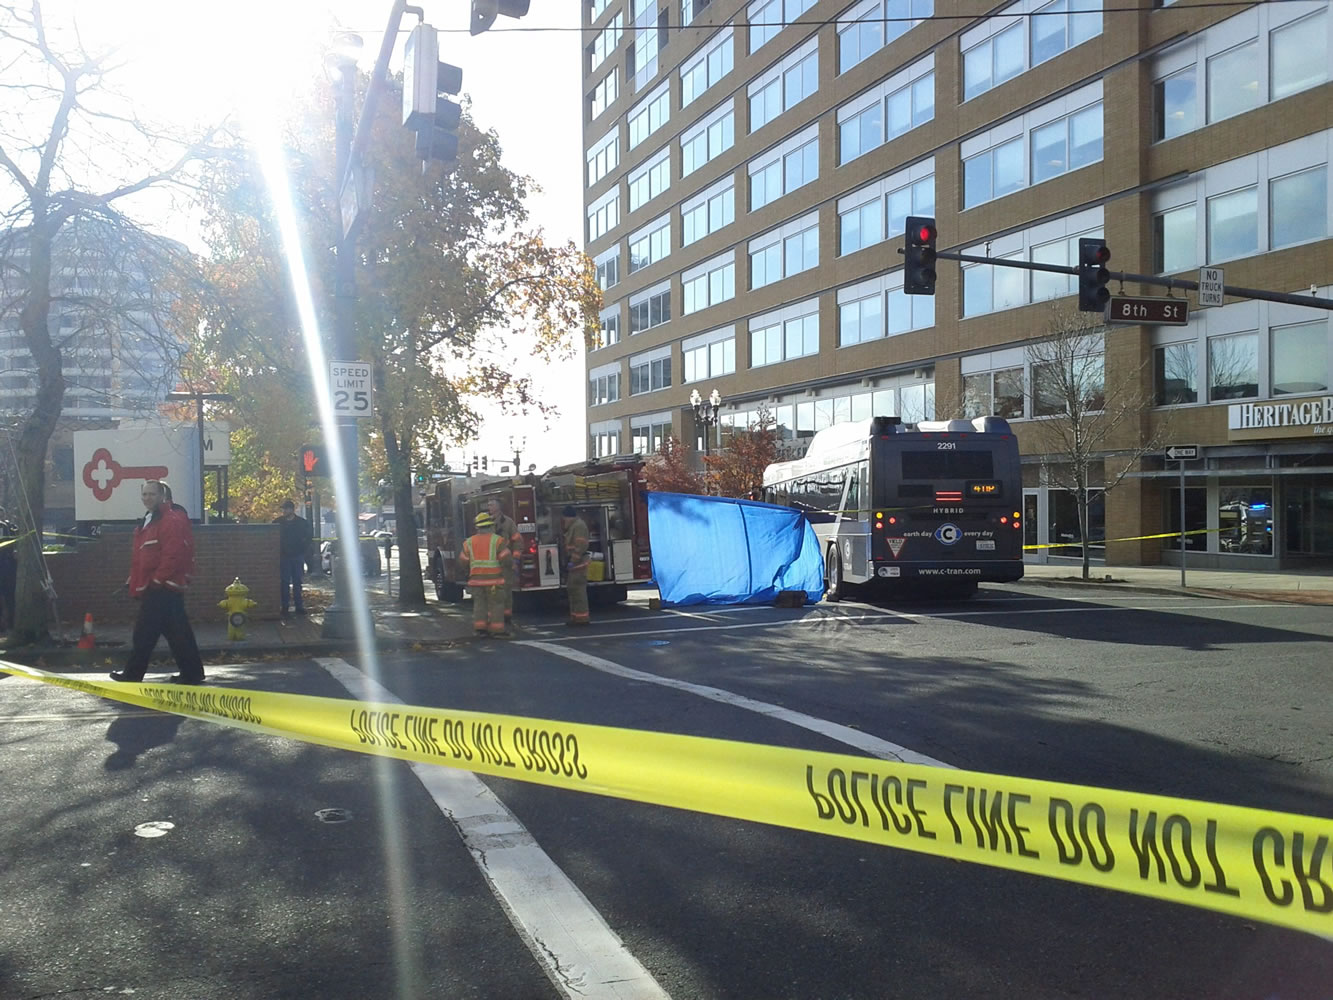 Rescuers are working to extract the victim from under a C-Tran bus at 8th and Washington Streets in Vancouver.